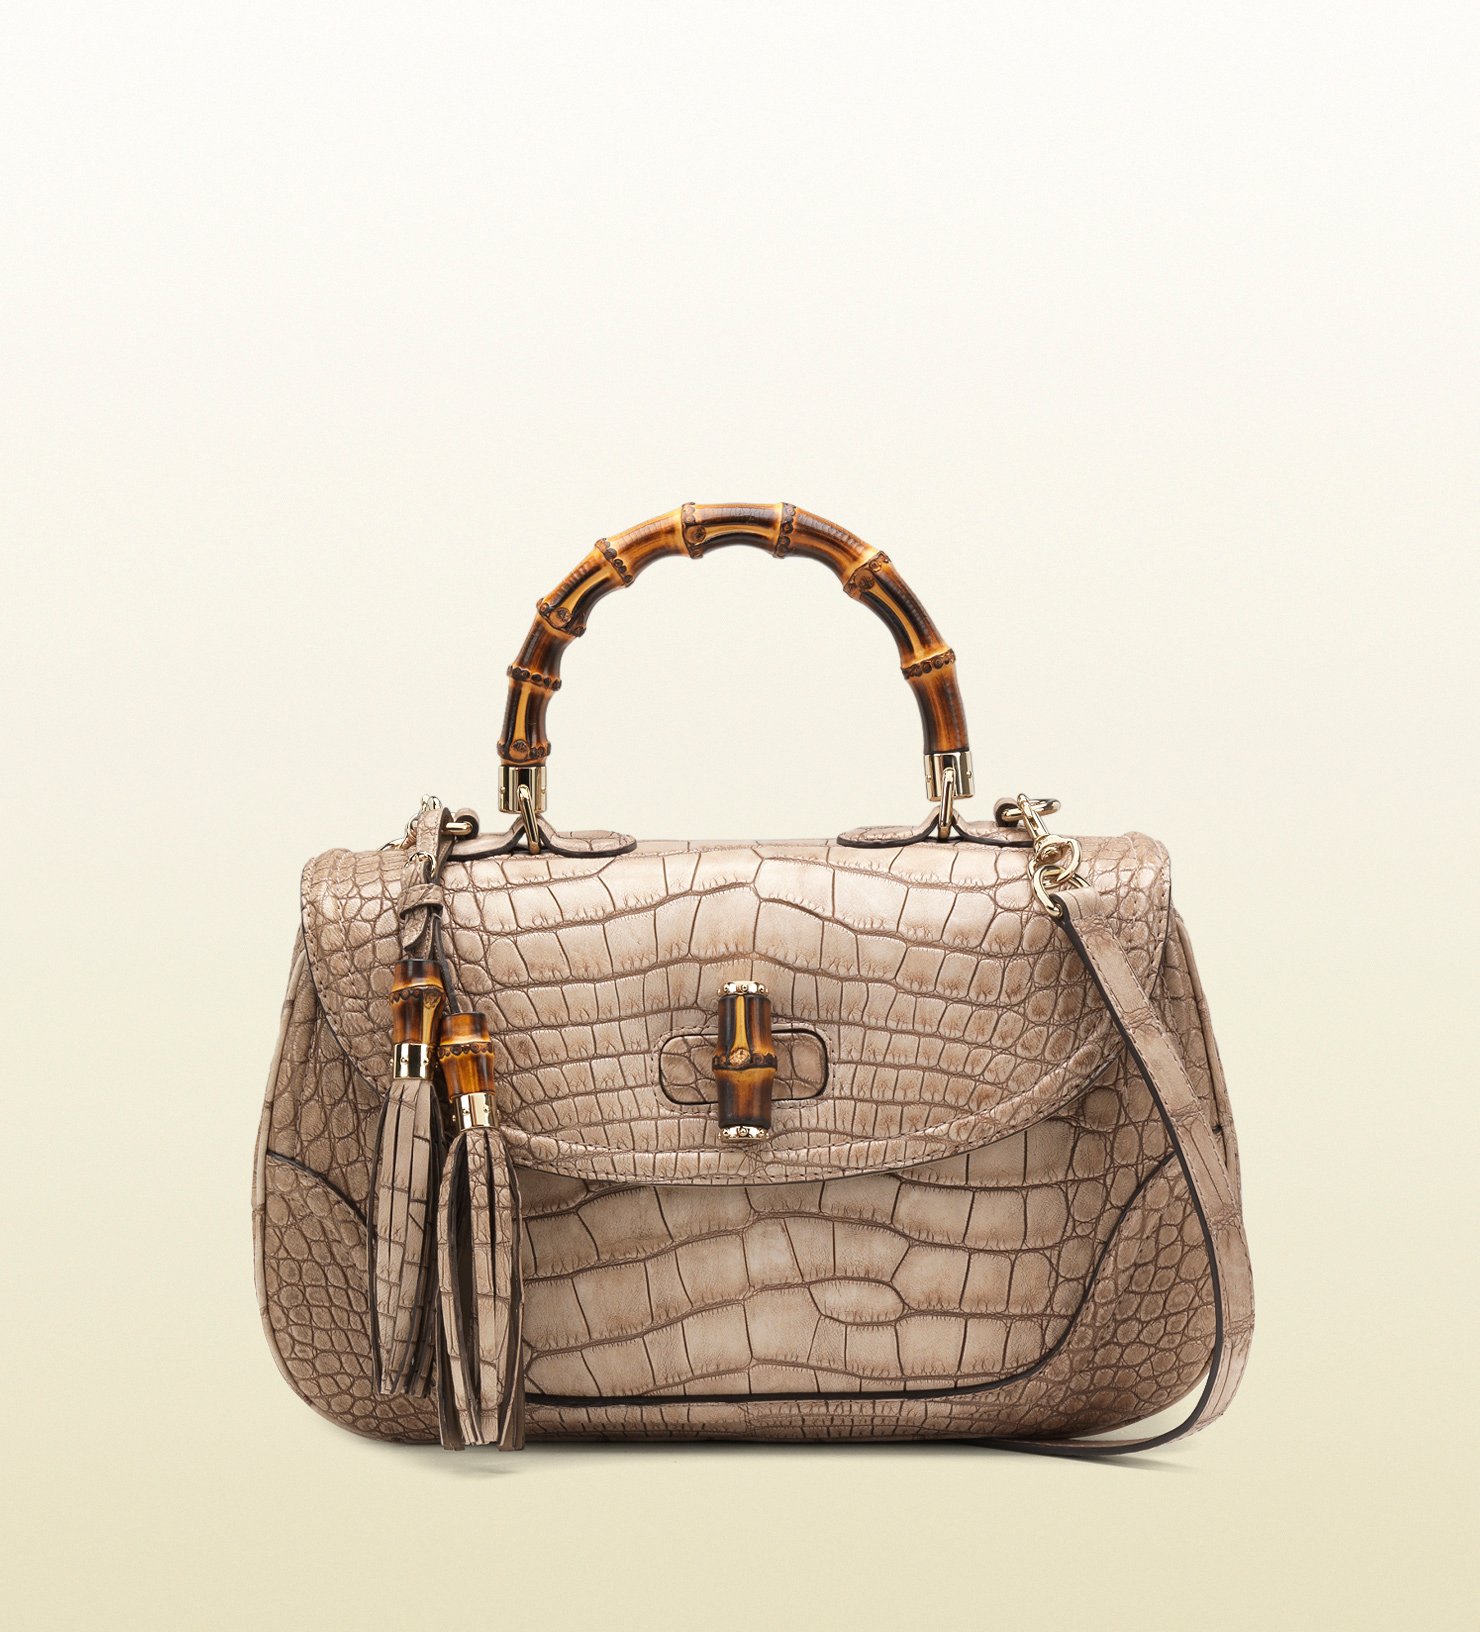 Lyst - Gucci New Bamboo Crocodile Top Handle Bag in Natural